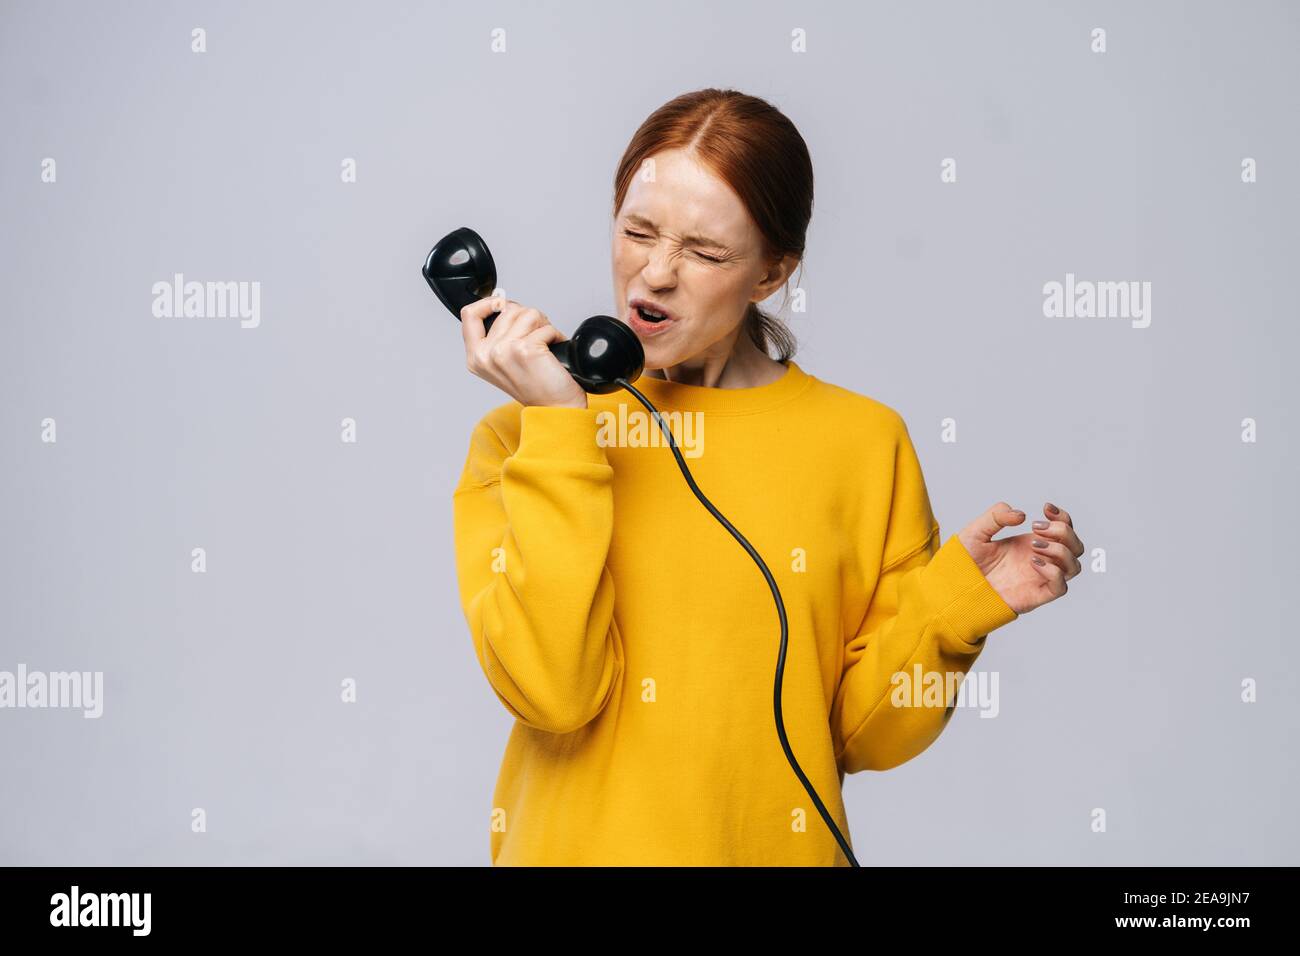 Furious angry young woman in stylish yellow sweater talking on retro phone and screaming in handset. Stock Photo